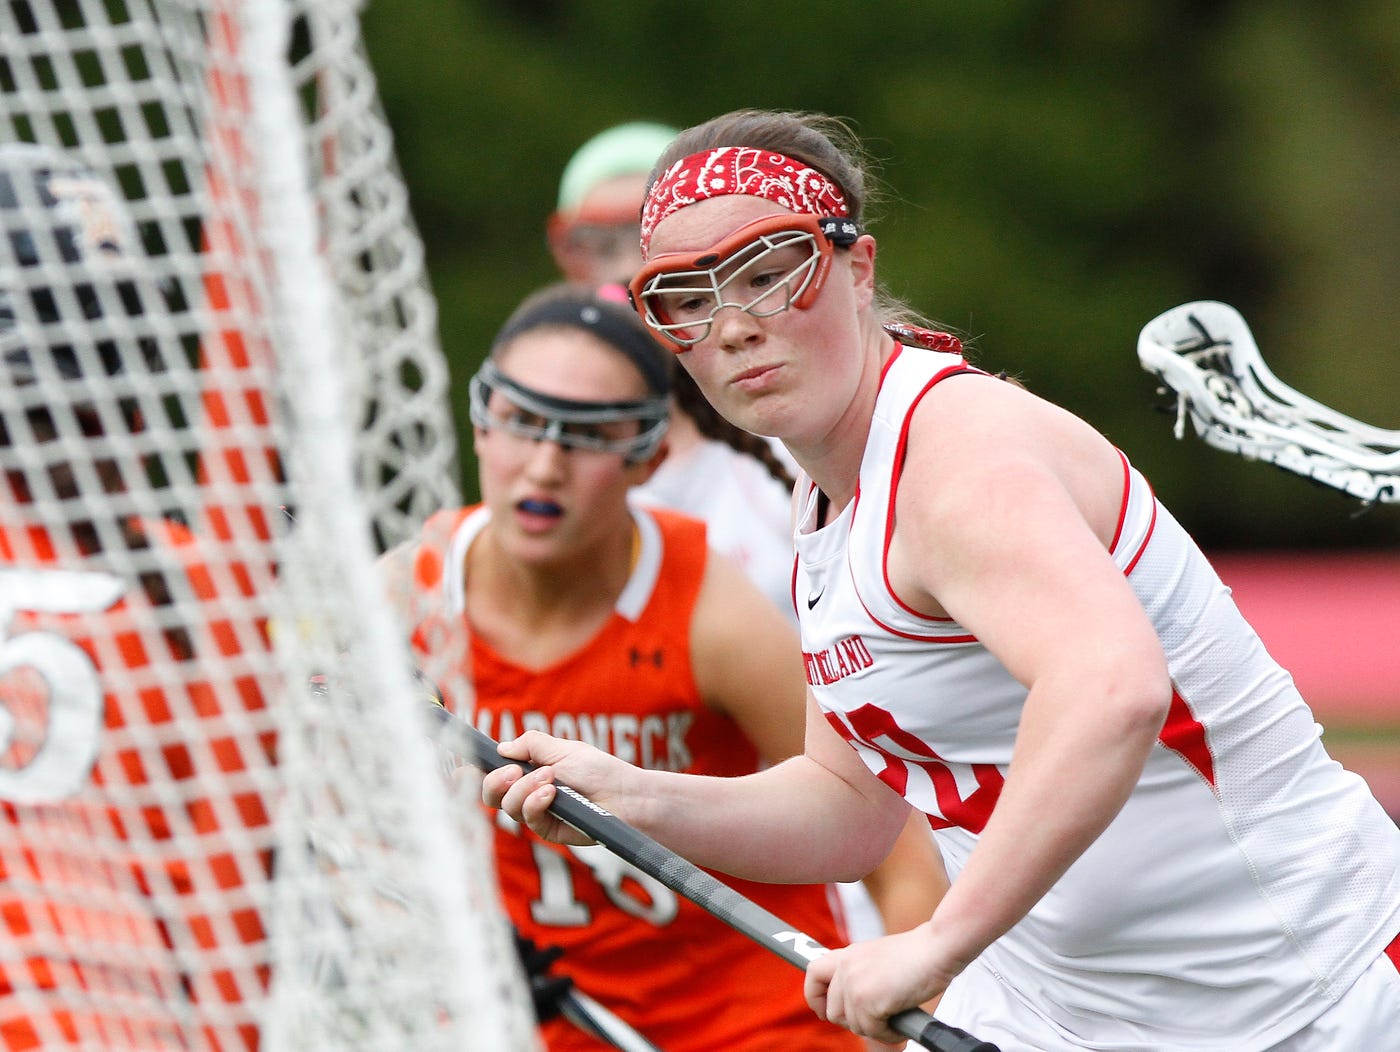 North Rockland's Kaitlyn Gutenberger (20) takes a shot on goal during a girls lacrosse game against Mamaroneck at North Rockland High School in Thiells on Saturday, April 02, 2016.